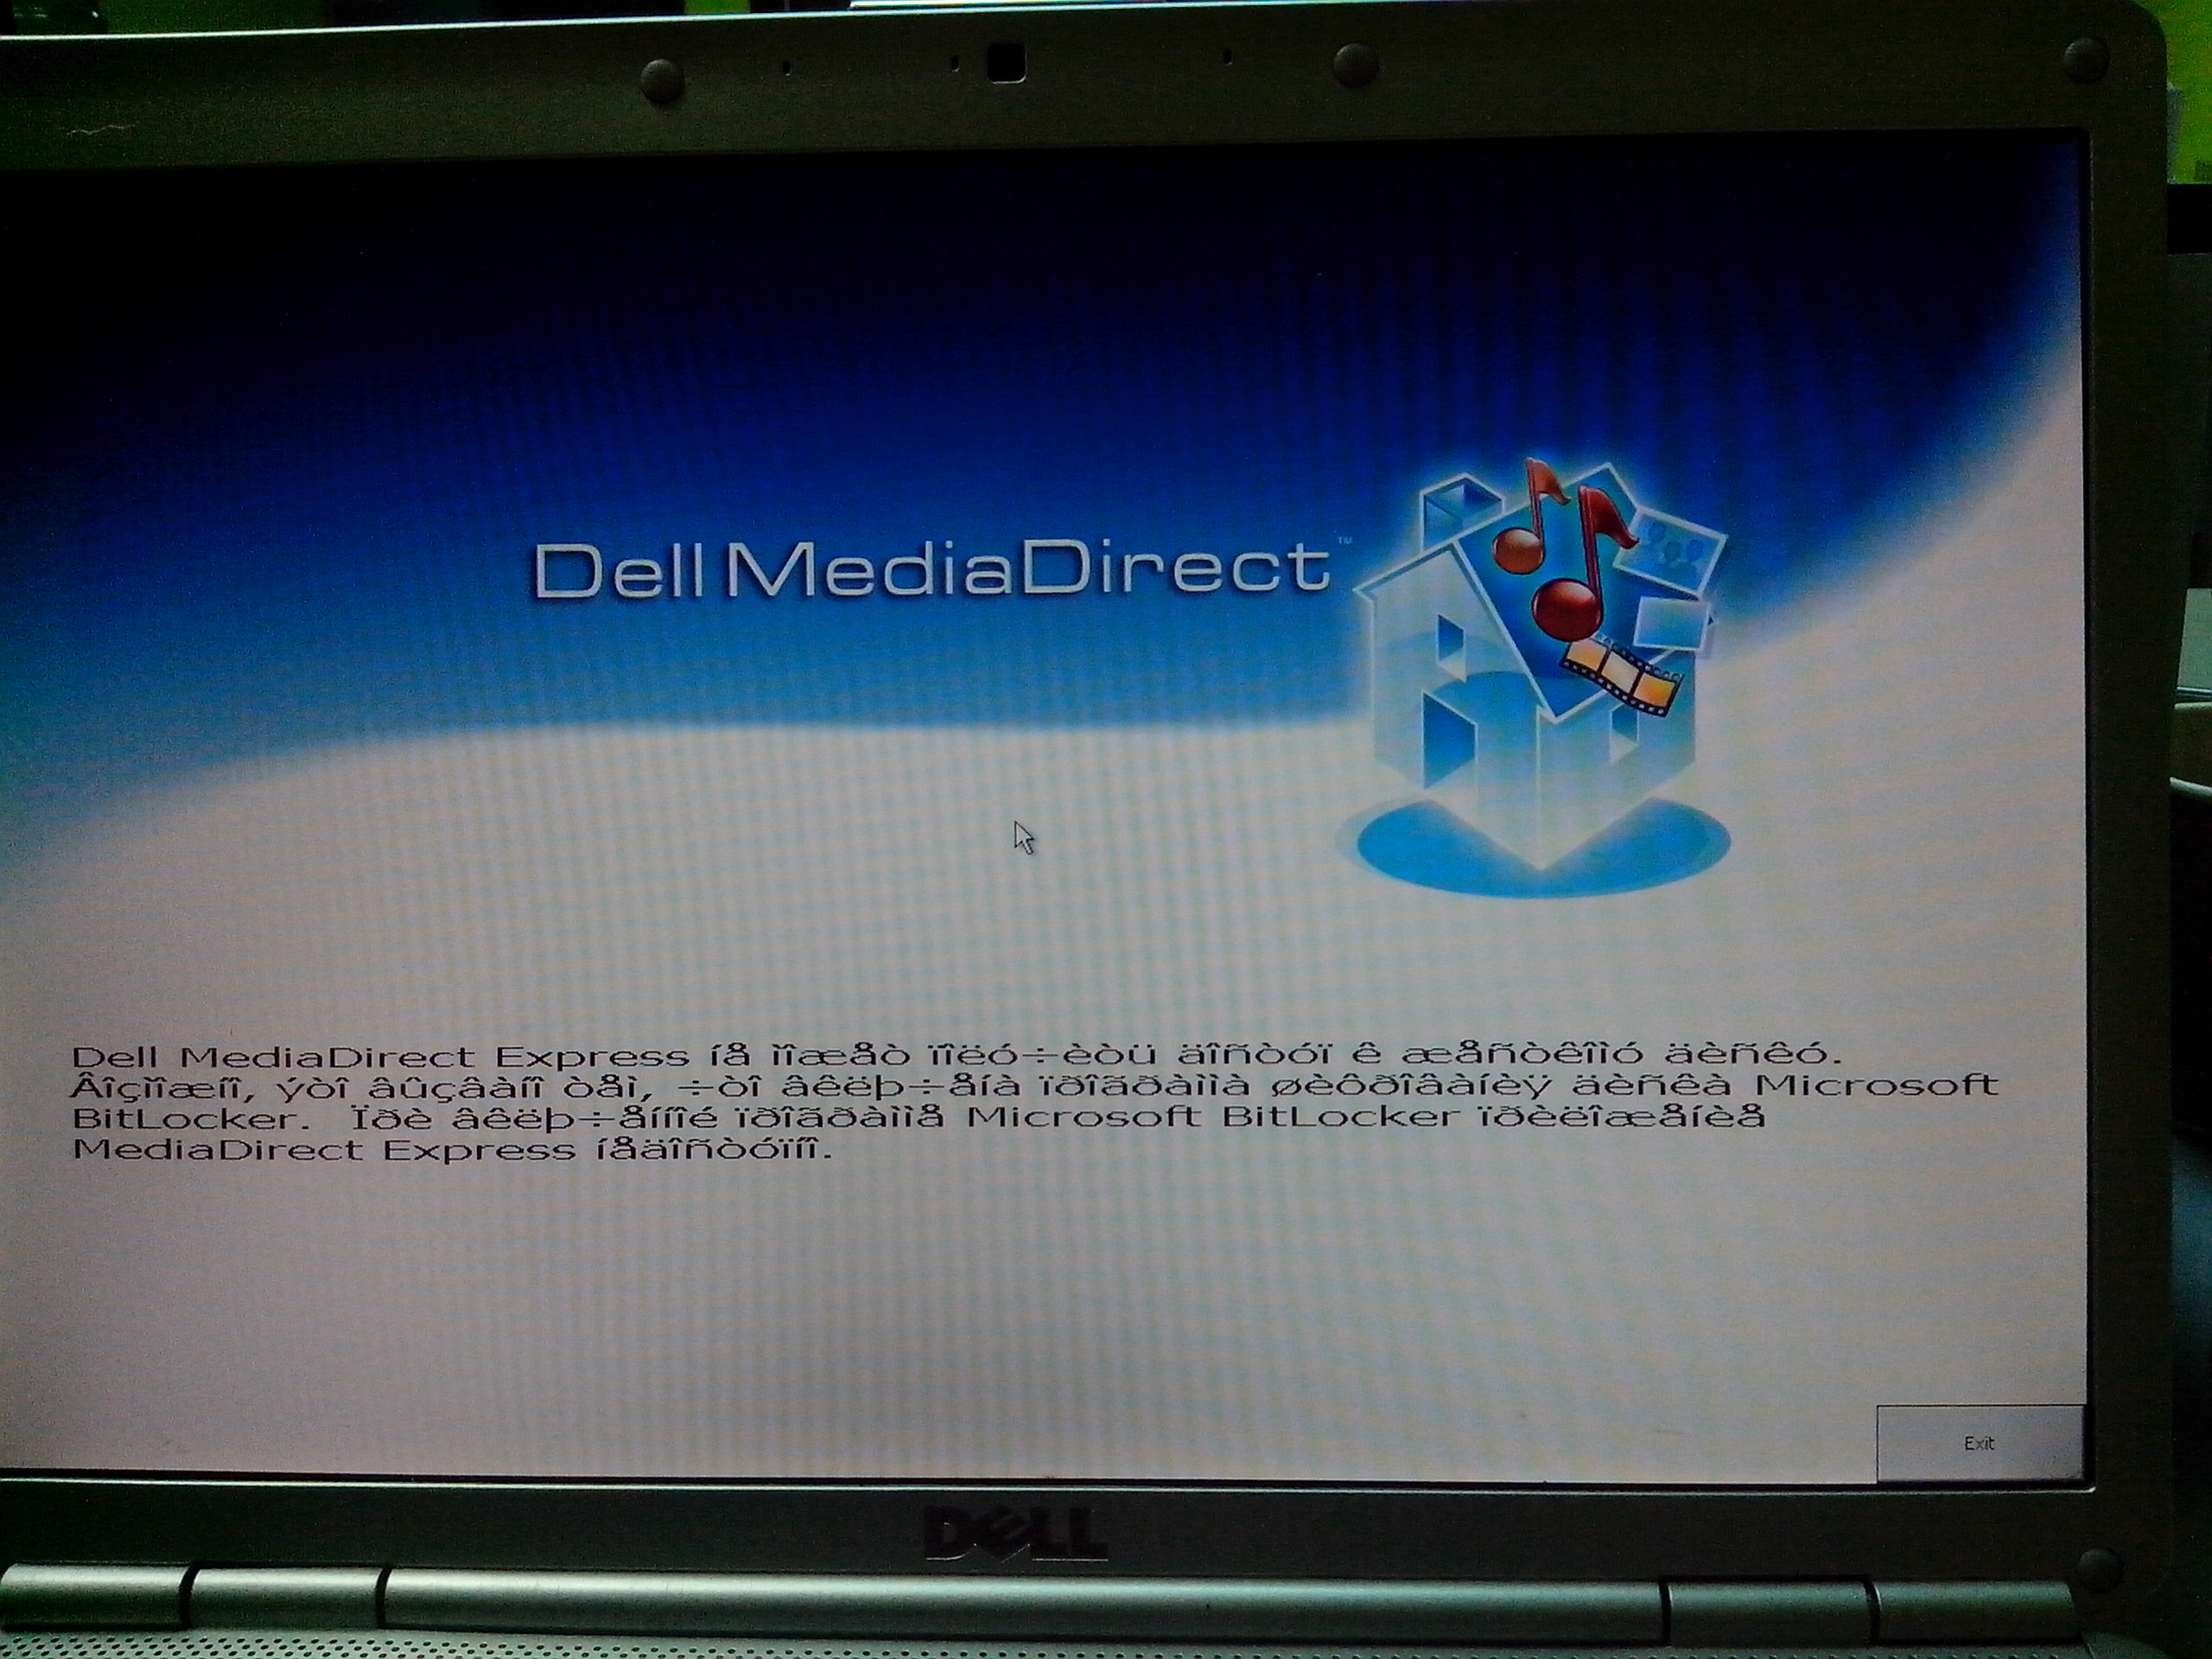 Ноутбук dell MEDIADIRECT. Кнопка dell MEDIADIRECT. Dell support assist. Ноутбук Control Rapid prin dell MEDIADIRECT. Dell сервис dell support